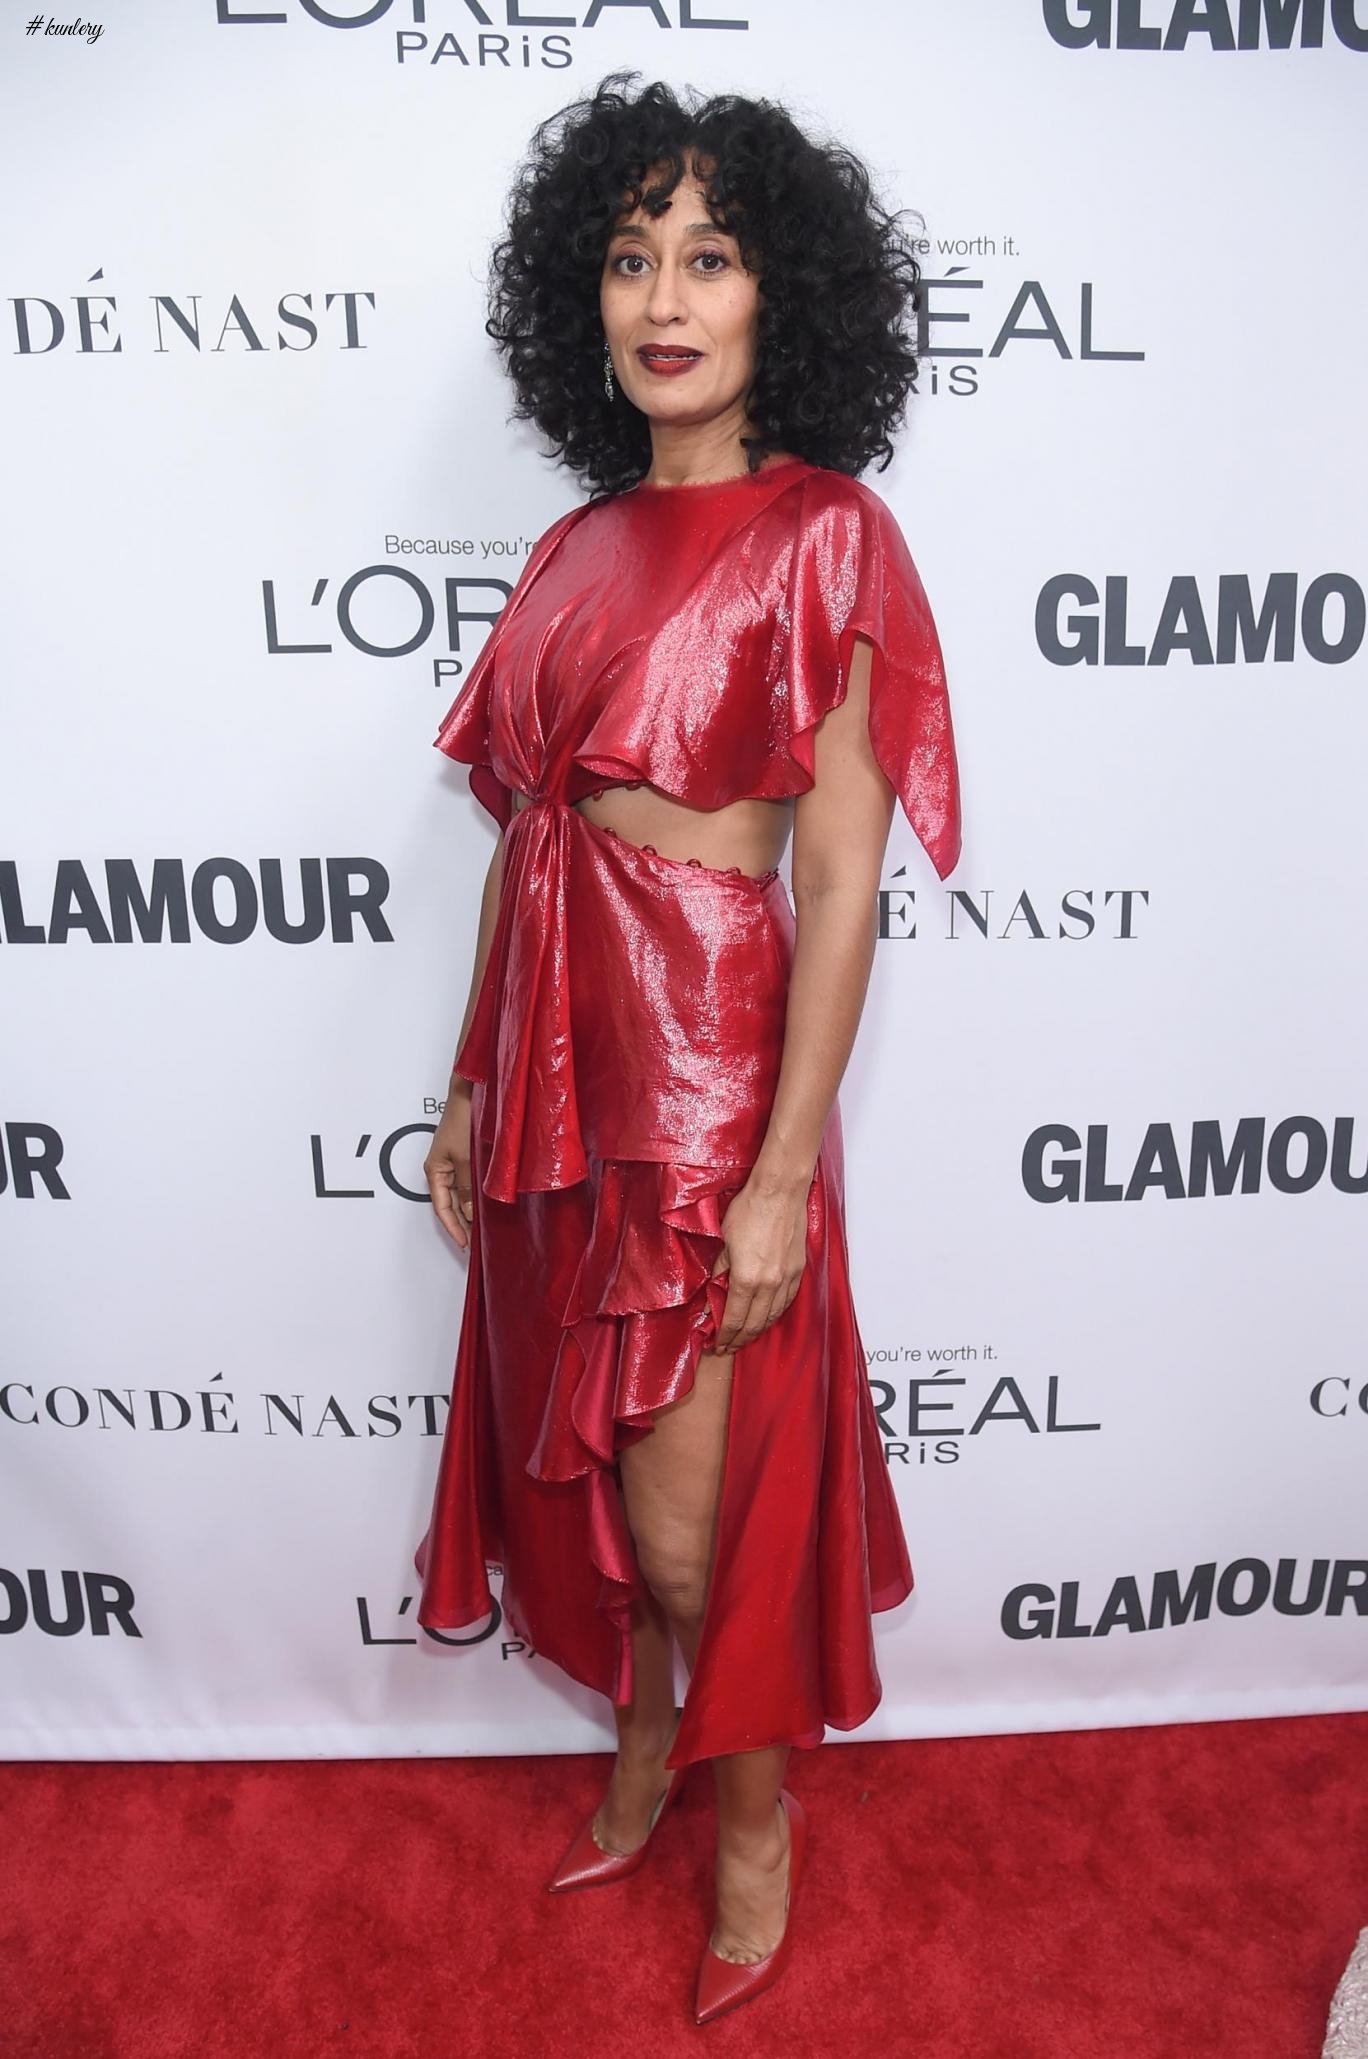 Check out The Best Dressed Women At The 2017 Glamour Women Of The Year Awards